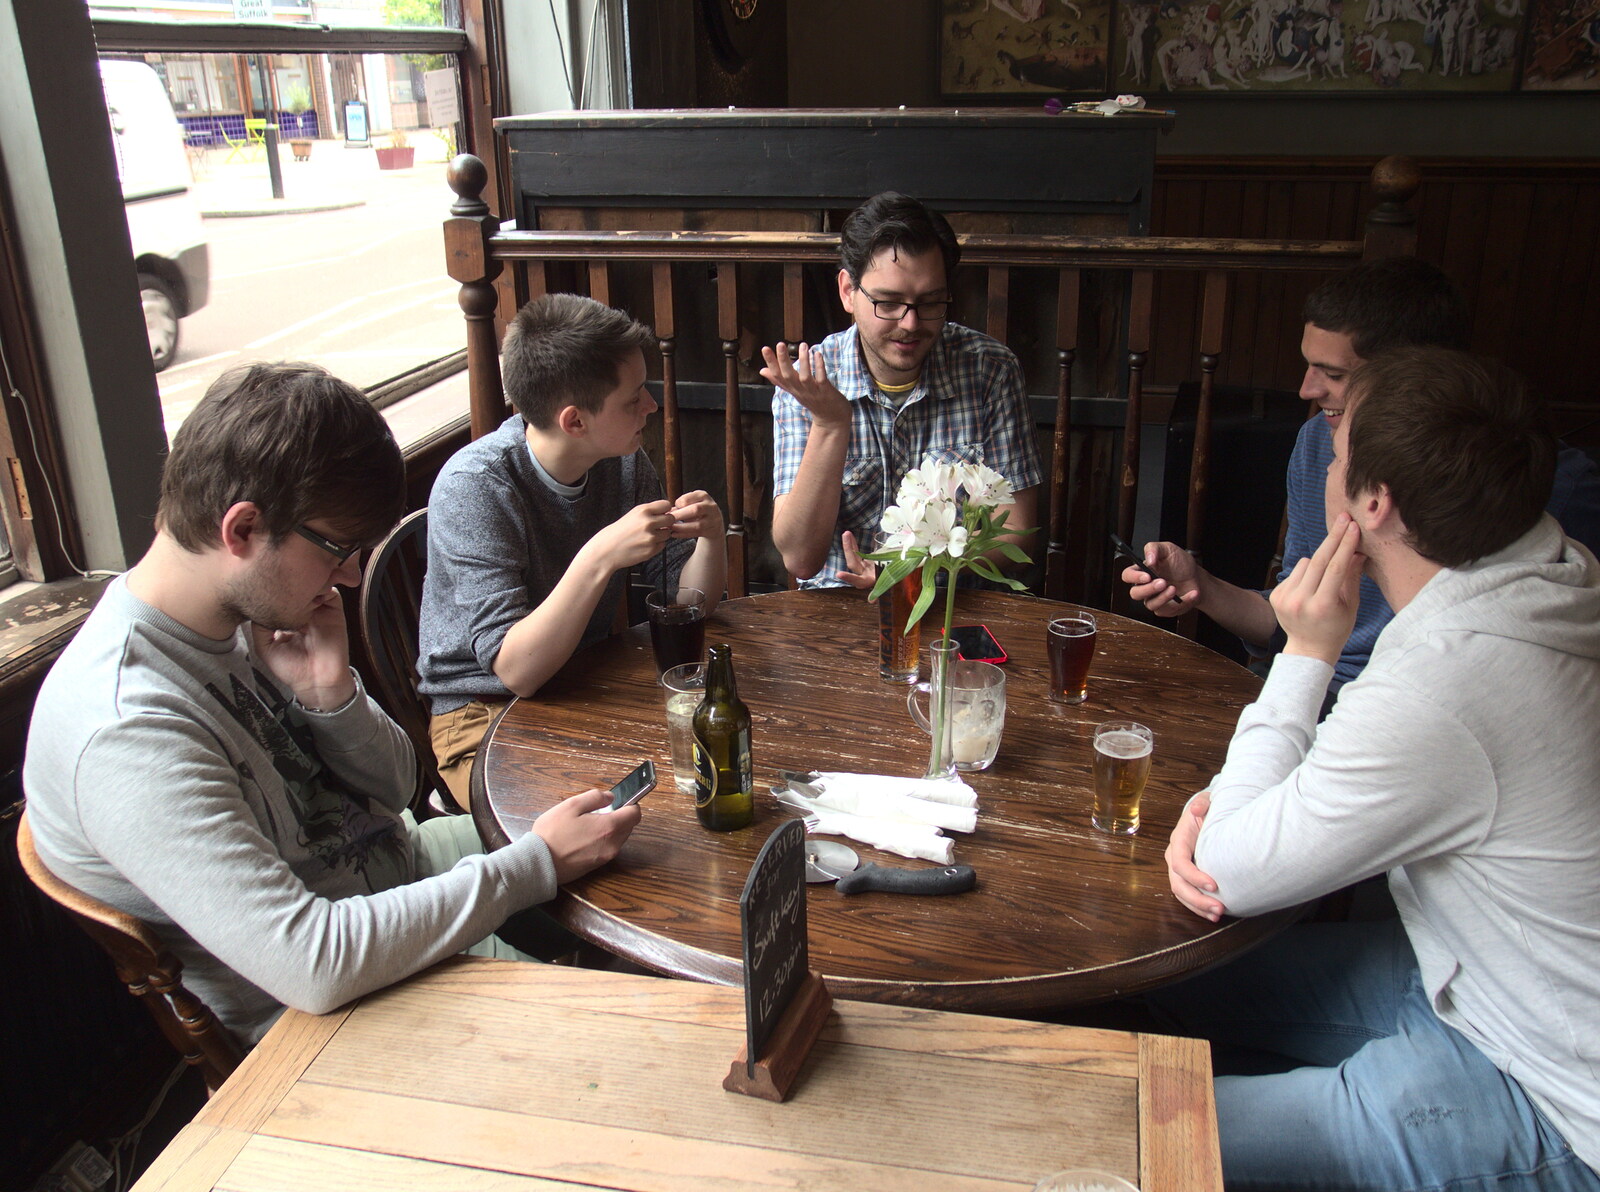 SwiftKey discuss issues of the day from A Trip to Pizza Pub, Great Suffolk Street, Southwark - 8th July 2014